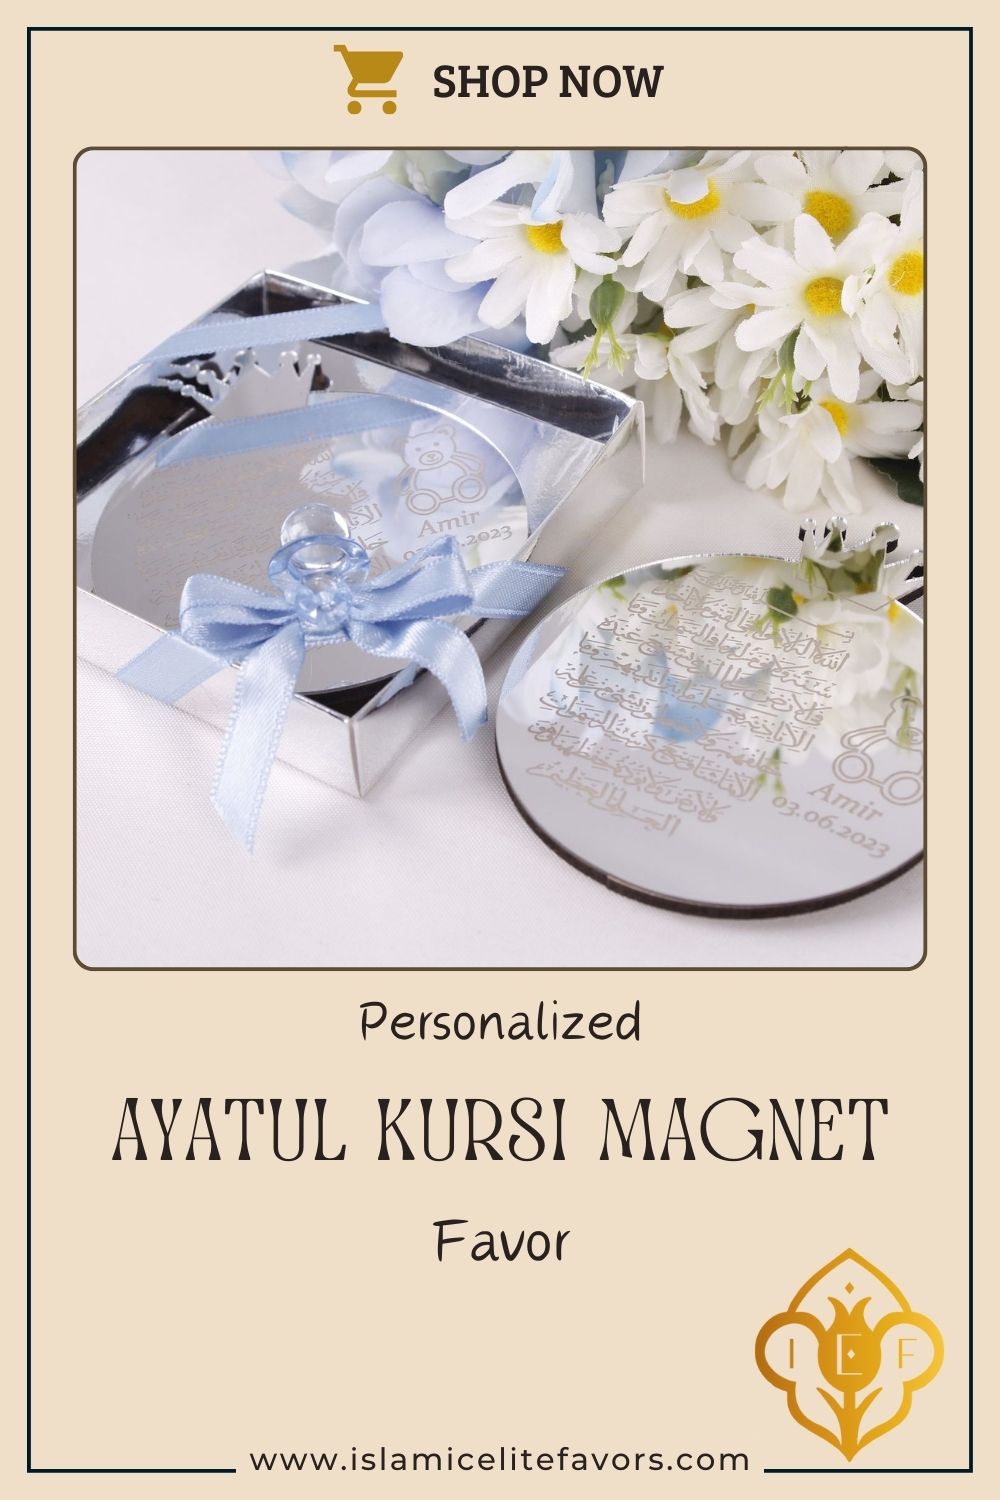 Personalized Baby Shower Favor Ayatul Kursi Magnet Silver Teddy Bear - Islamic Elite Favors is a handmade gift shop offering a wide variety of unique and personalized gifts for all occasions. Whether you're looking for the perfect Ramadan, Eid, Hajj, wedding gift or something special for a birthday, baby shower or anniversary, we have something for everyone. High quality, made with love.